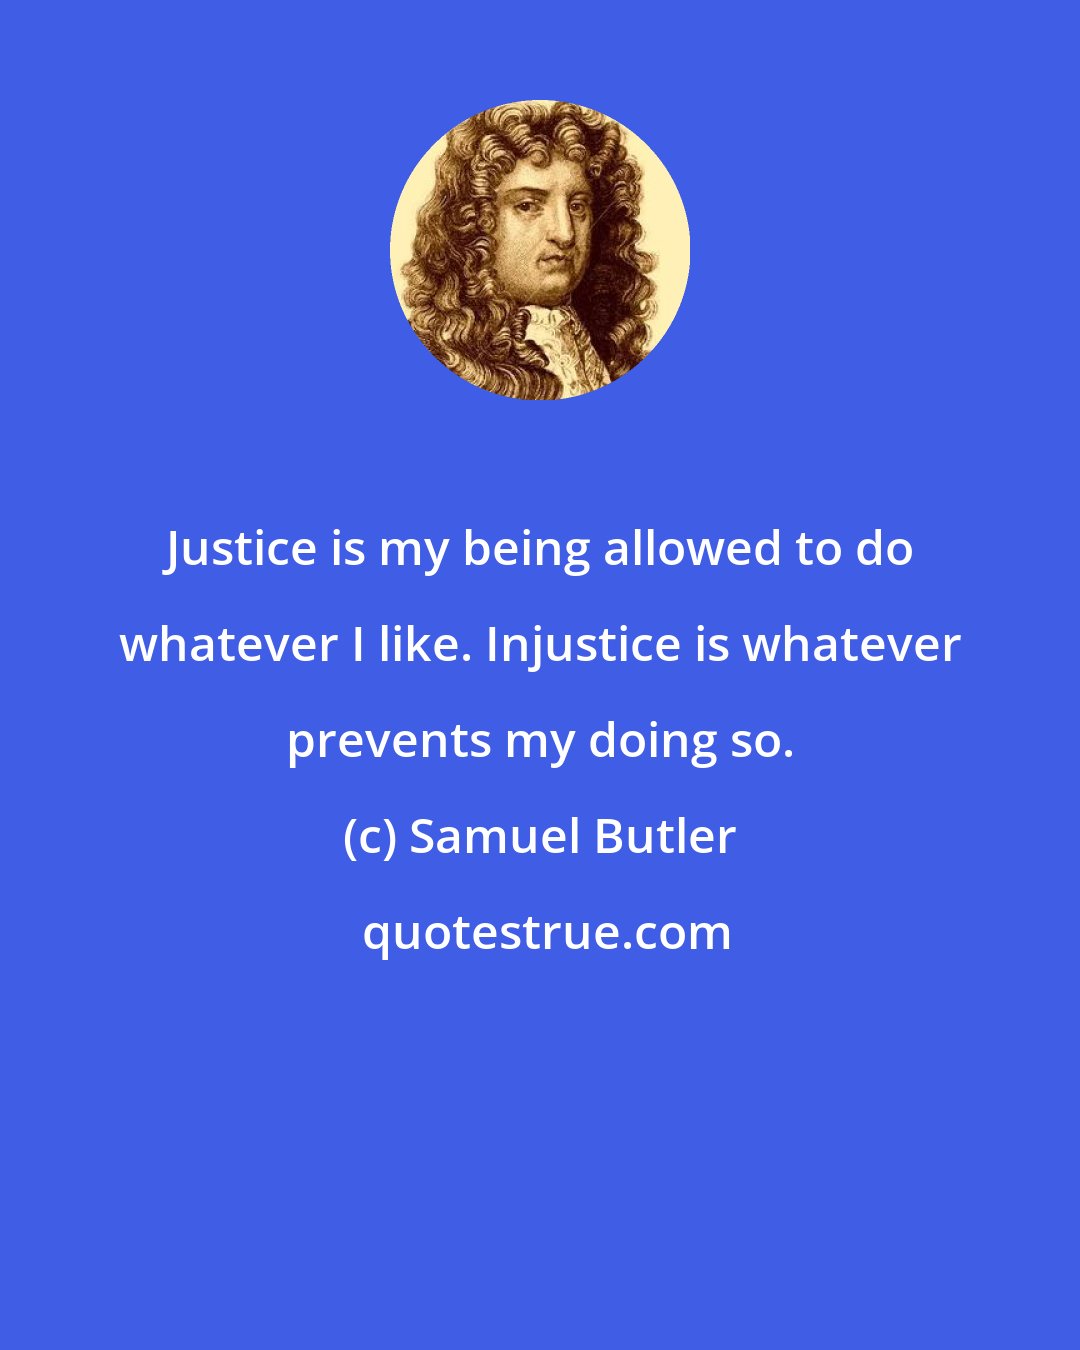 Samuel Butler: Justice is my being allowed to do whatever I like. Injustice is whatever prevents my doing so.